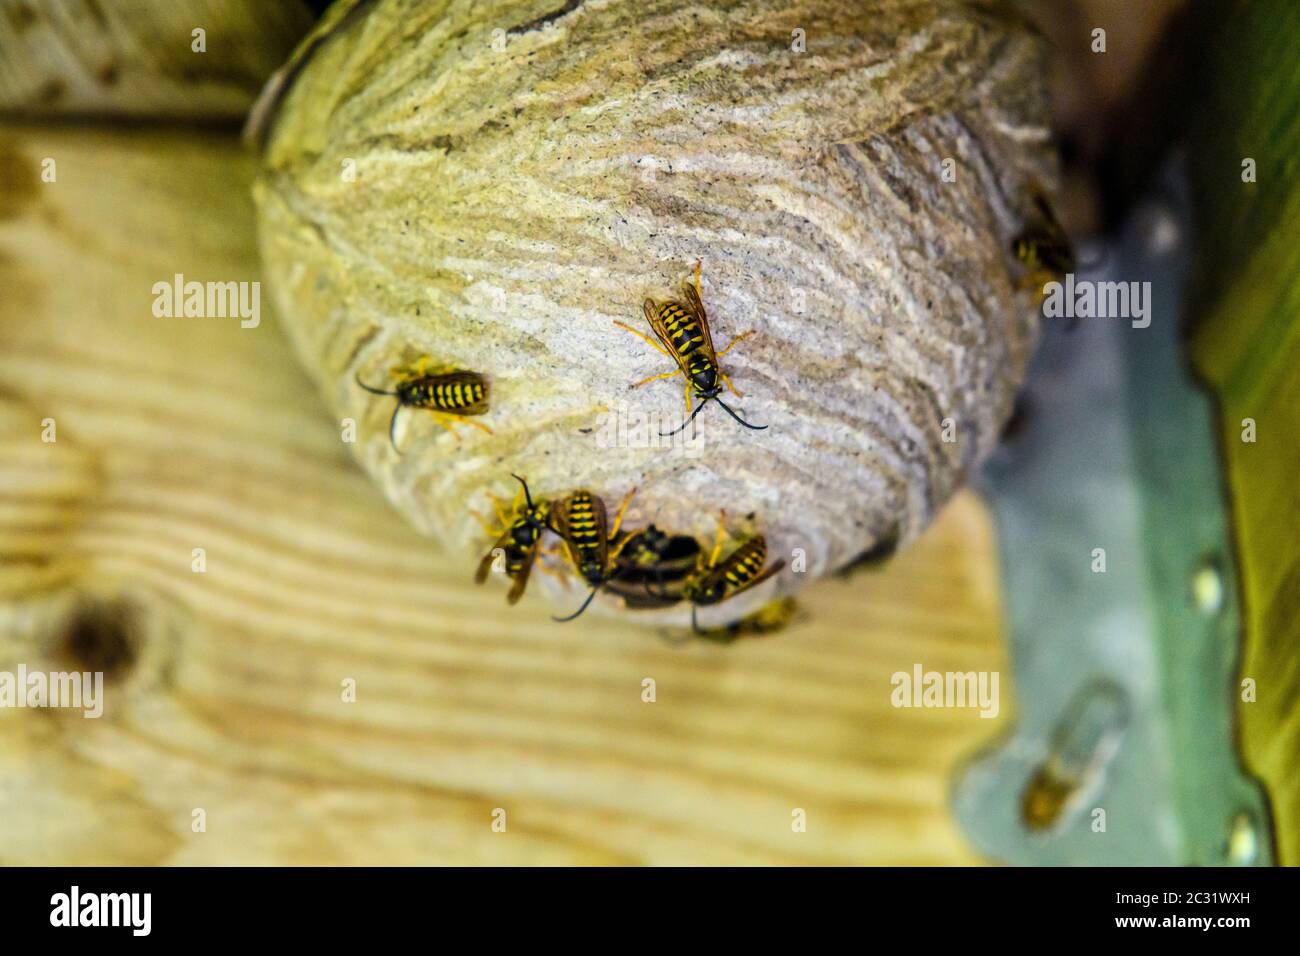 European paper wasp (Polistes dominula) Workers tending the nest, Greater Sudbury, Ontario, Canada Stock Photo